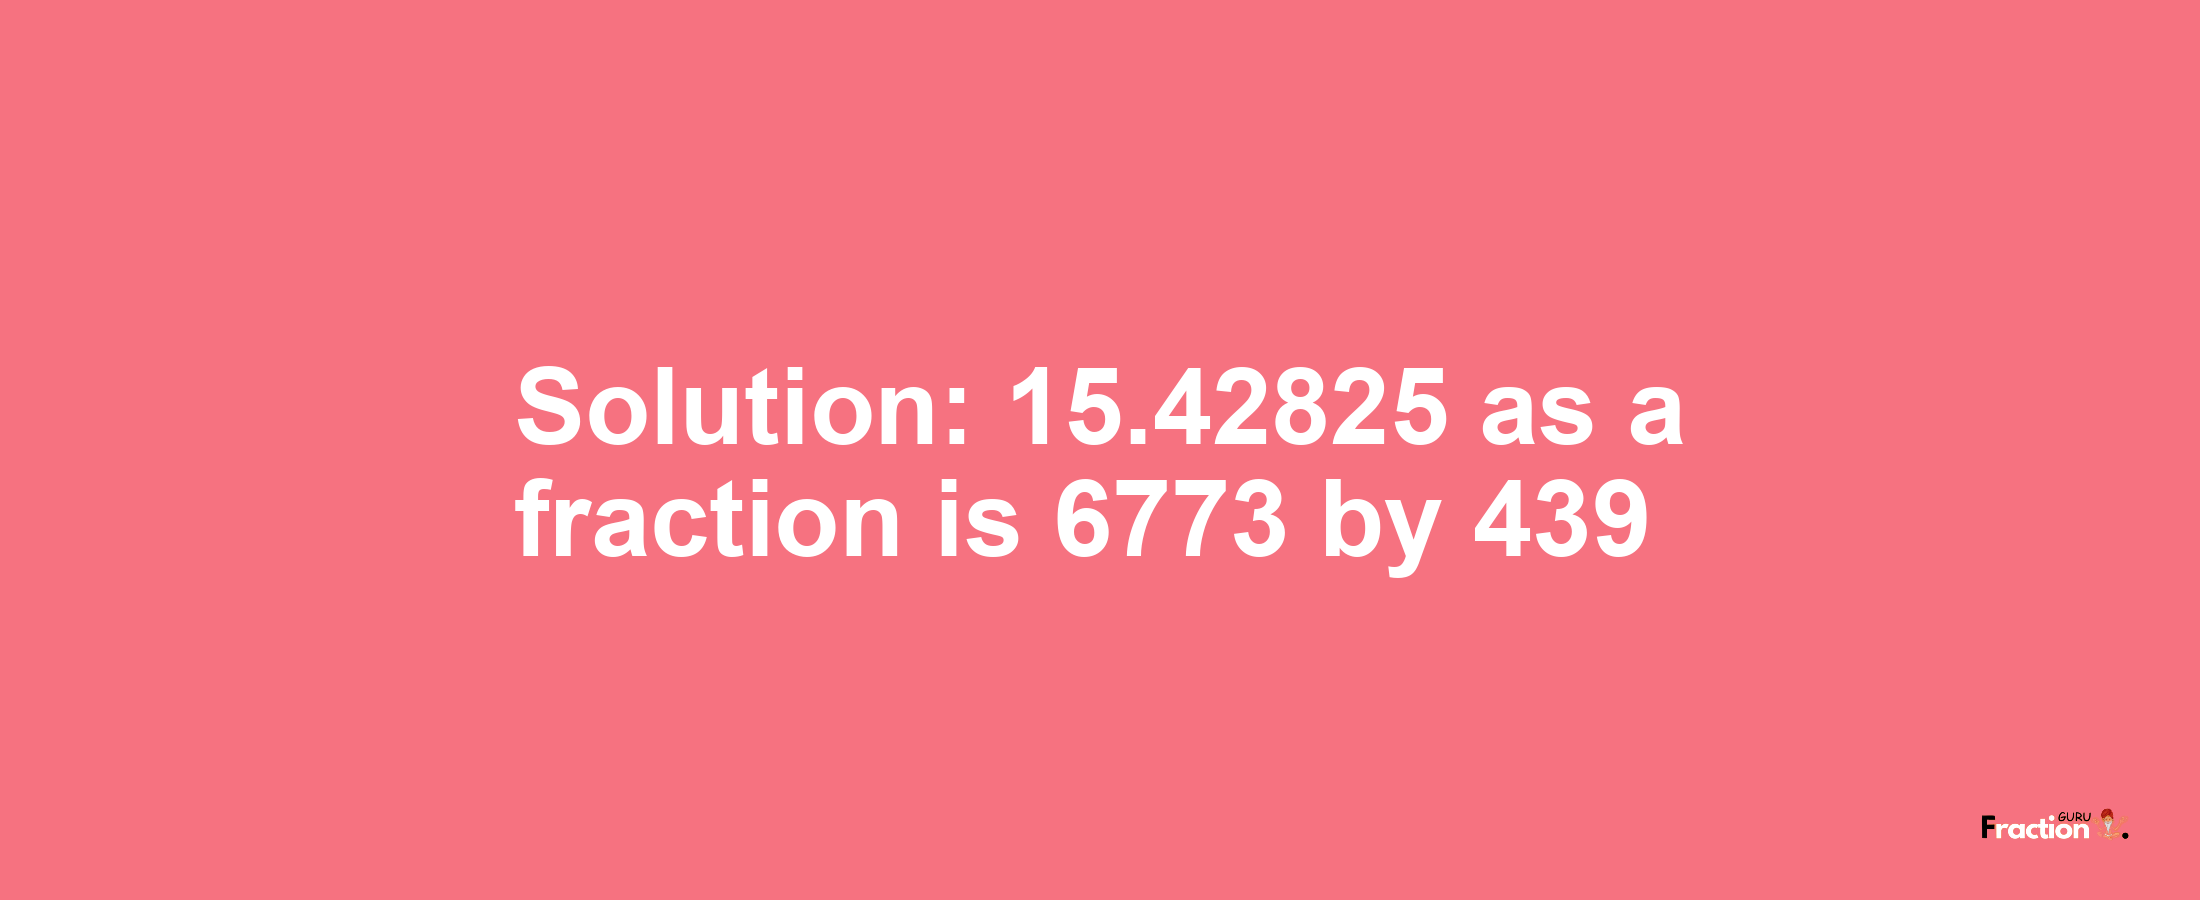 Solution:15.42825 as a fraction is 6773/439